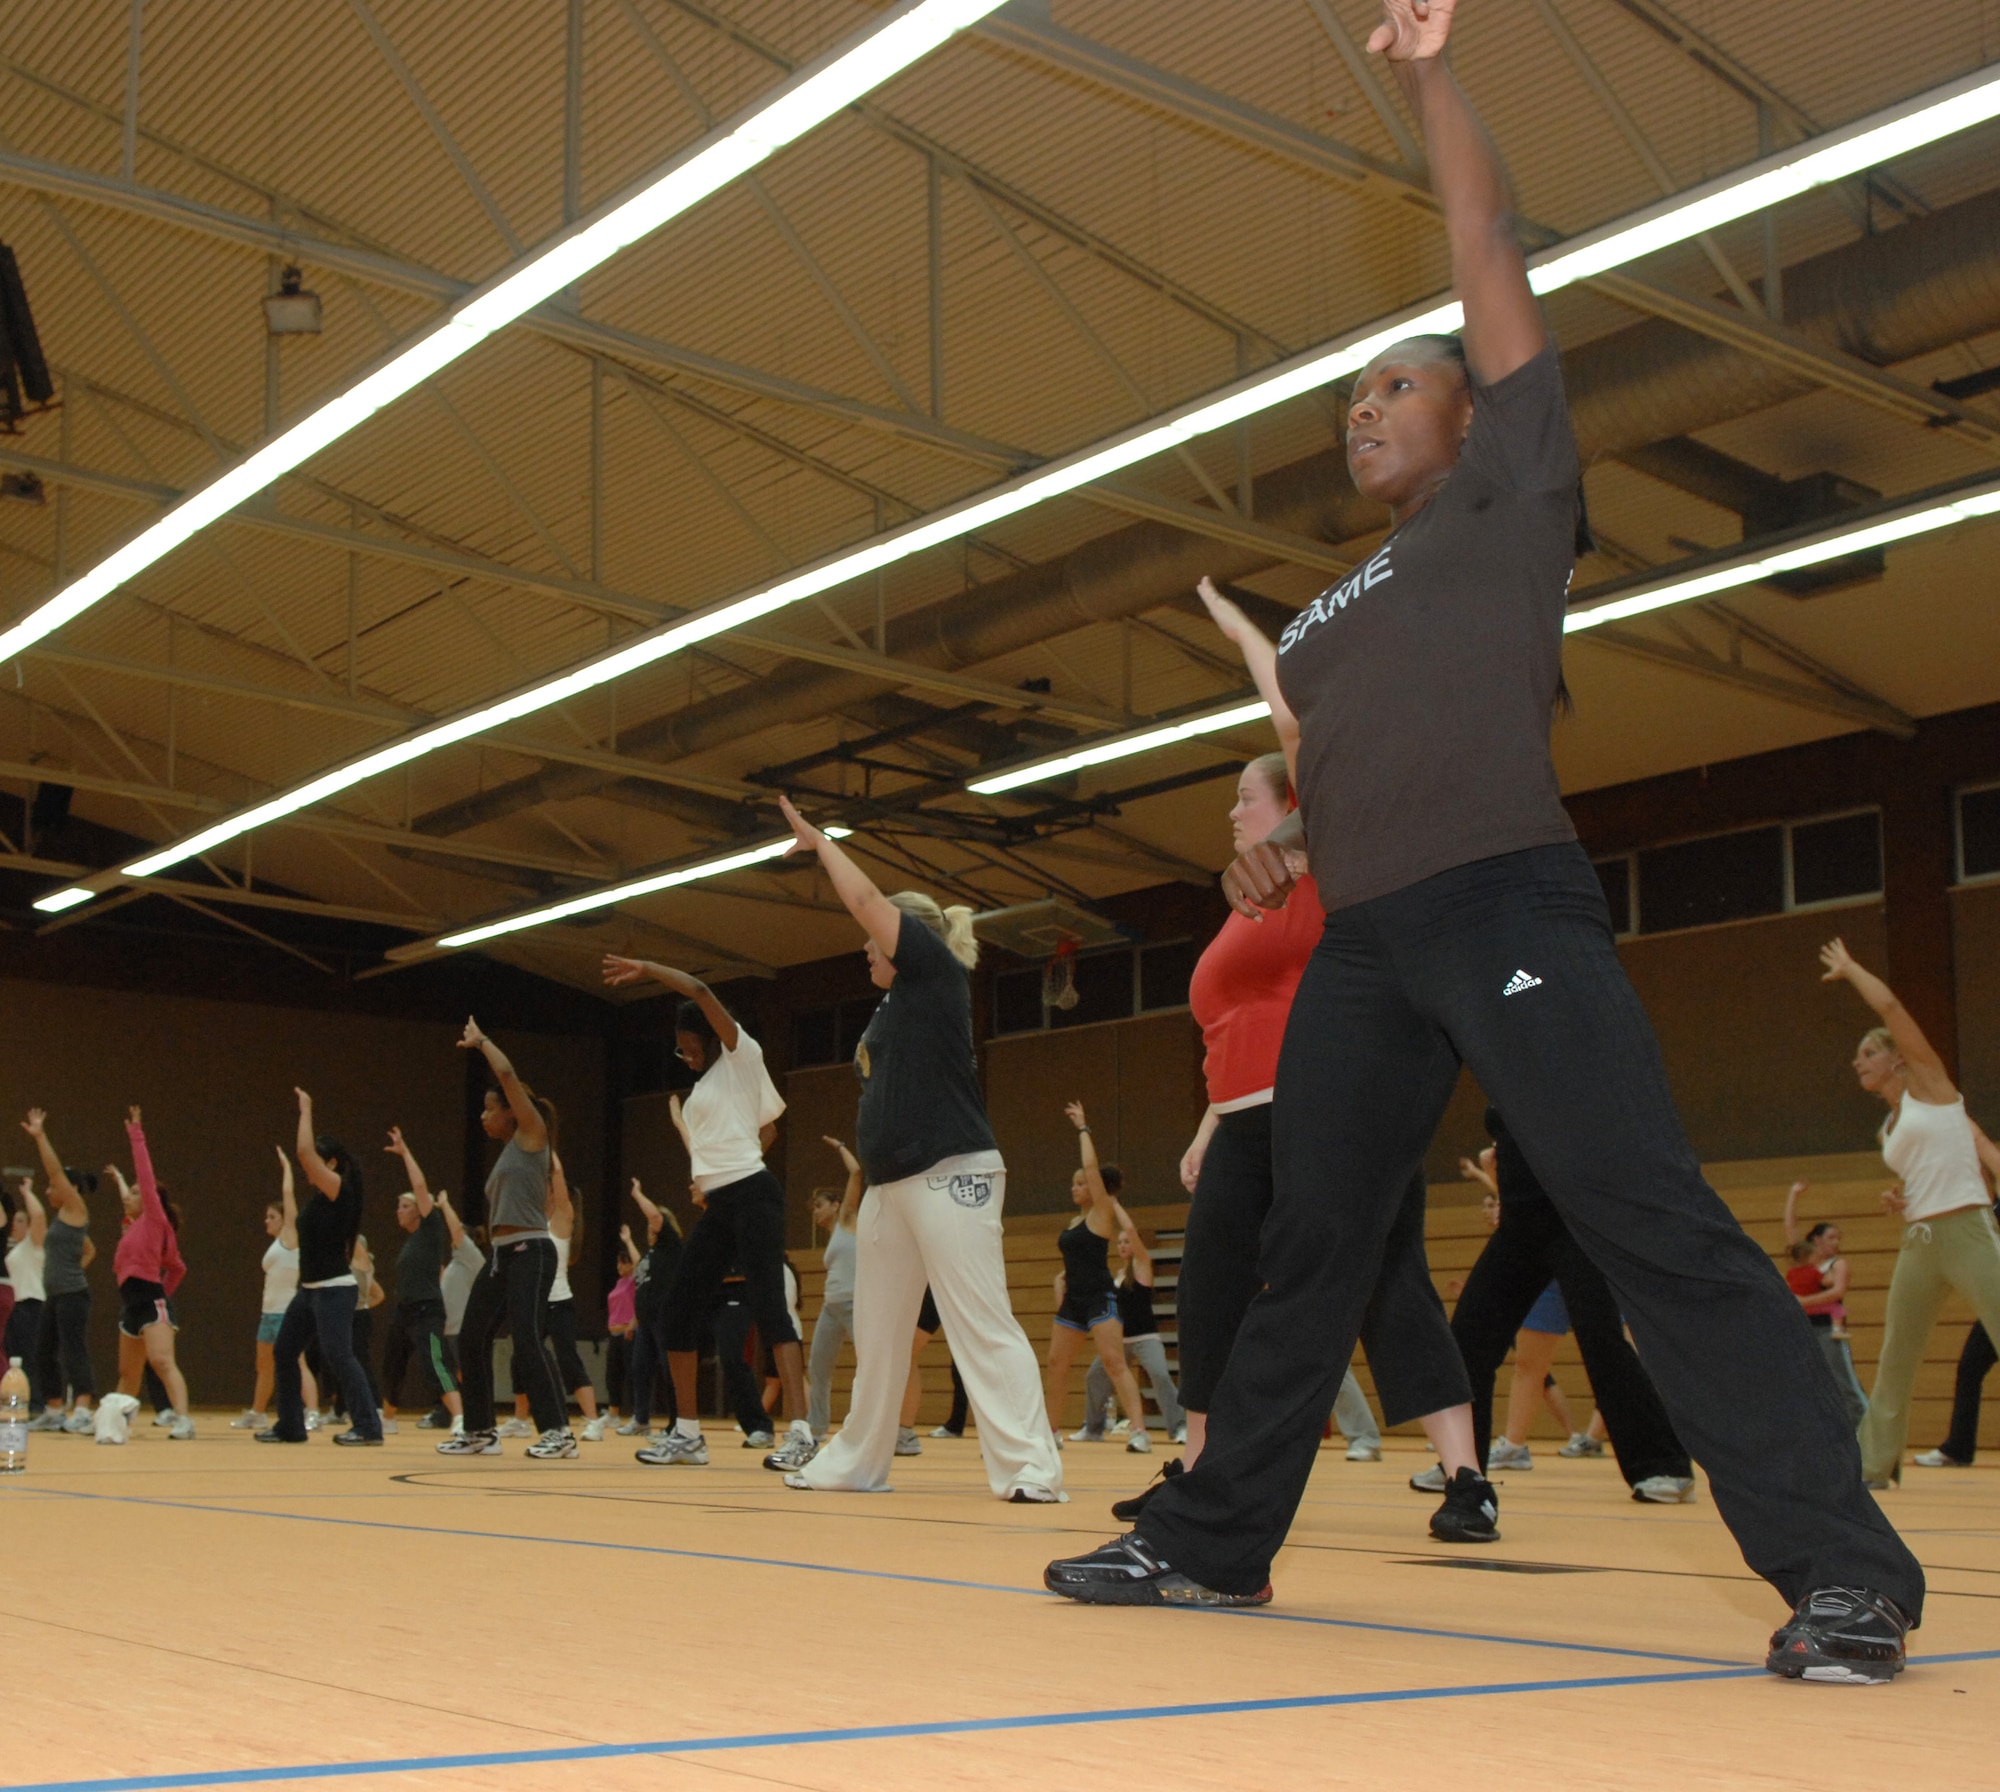 SPANGDAHLEM AIR BASE, Germany – Sabers participate in a rarely-offered Zumba class Sept. 25. Zumba incorporates dance and fitness, allowing its users to burn between 700 to 800 calories an hour. The class may be offered more frequently to sabers in the future. (U.S. Air Force photo/Airman 1st Class Staci Miller)